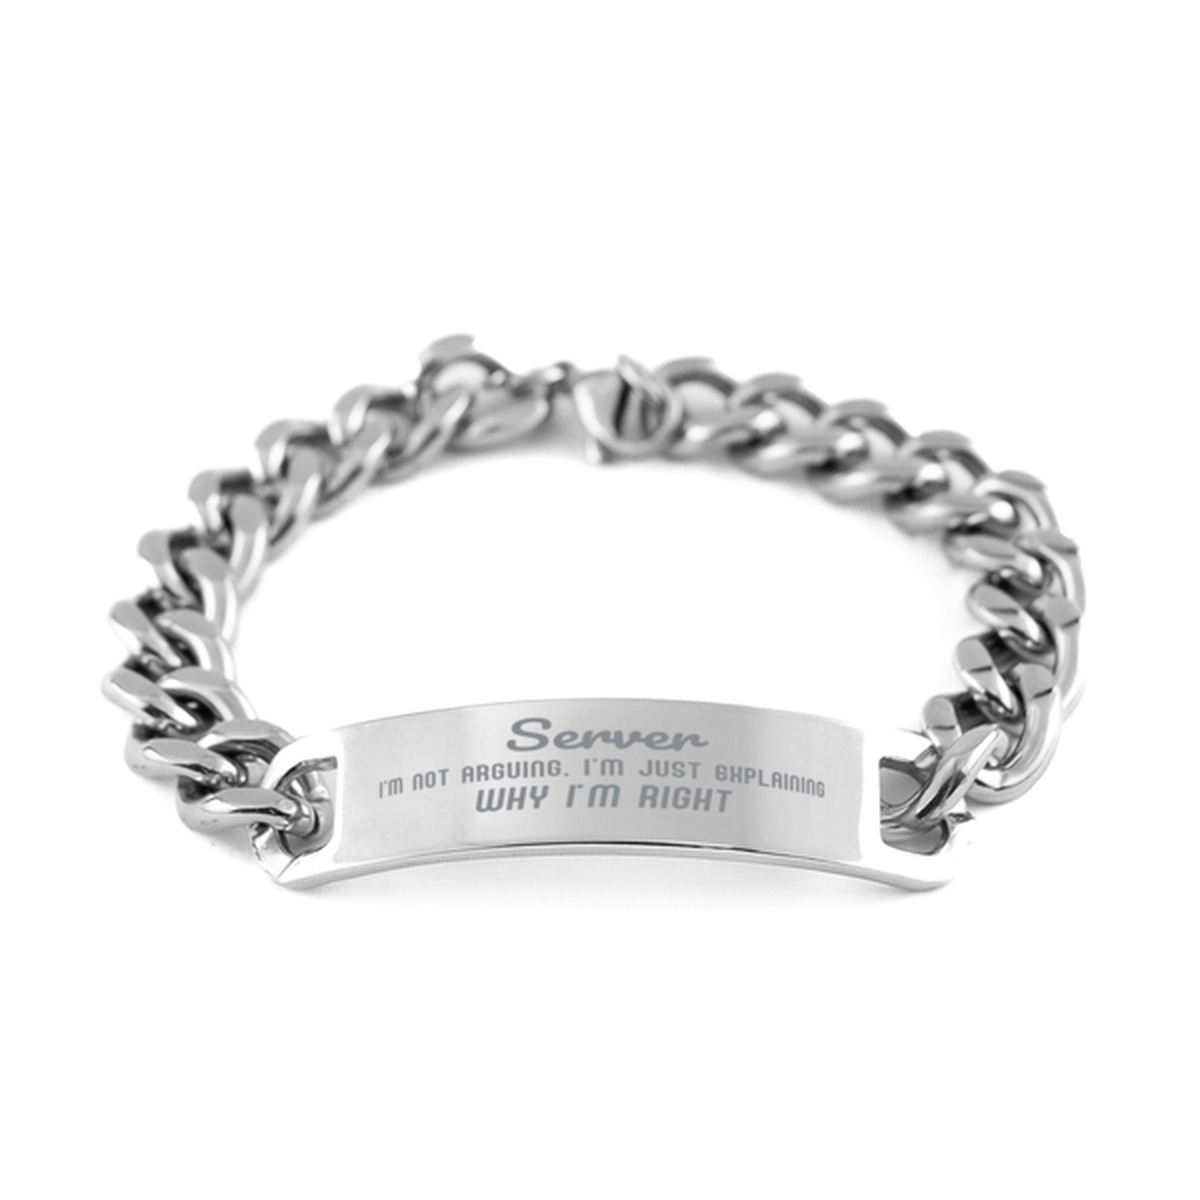 Server I'm not Arguing. I'm Just Explaining Why I'm RIGHT Cuban Chain Stainless Steel Bracelet, Graduation Birthday Christmas Server Gifts For Server Funny Saying Quote Present for Men Women Coworker